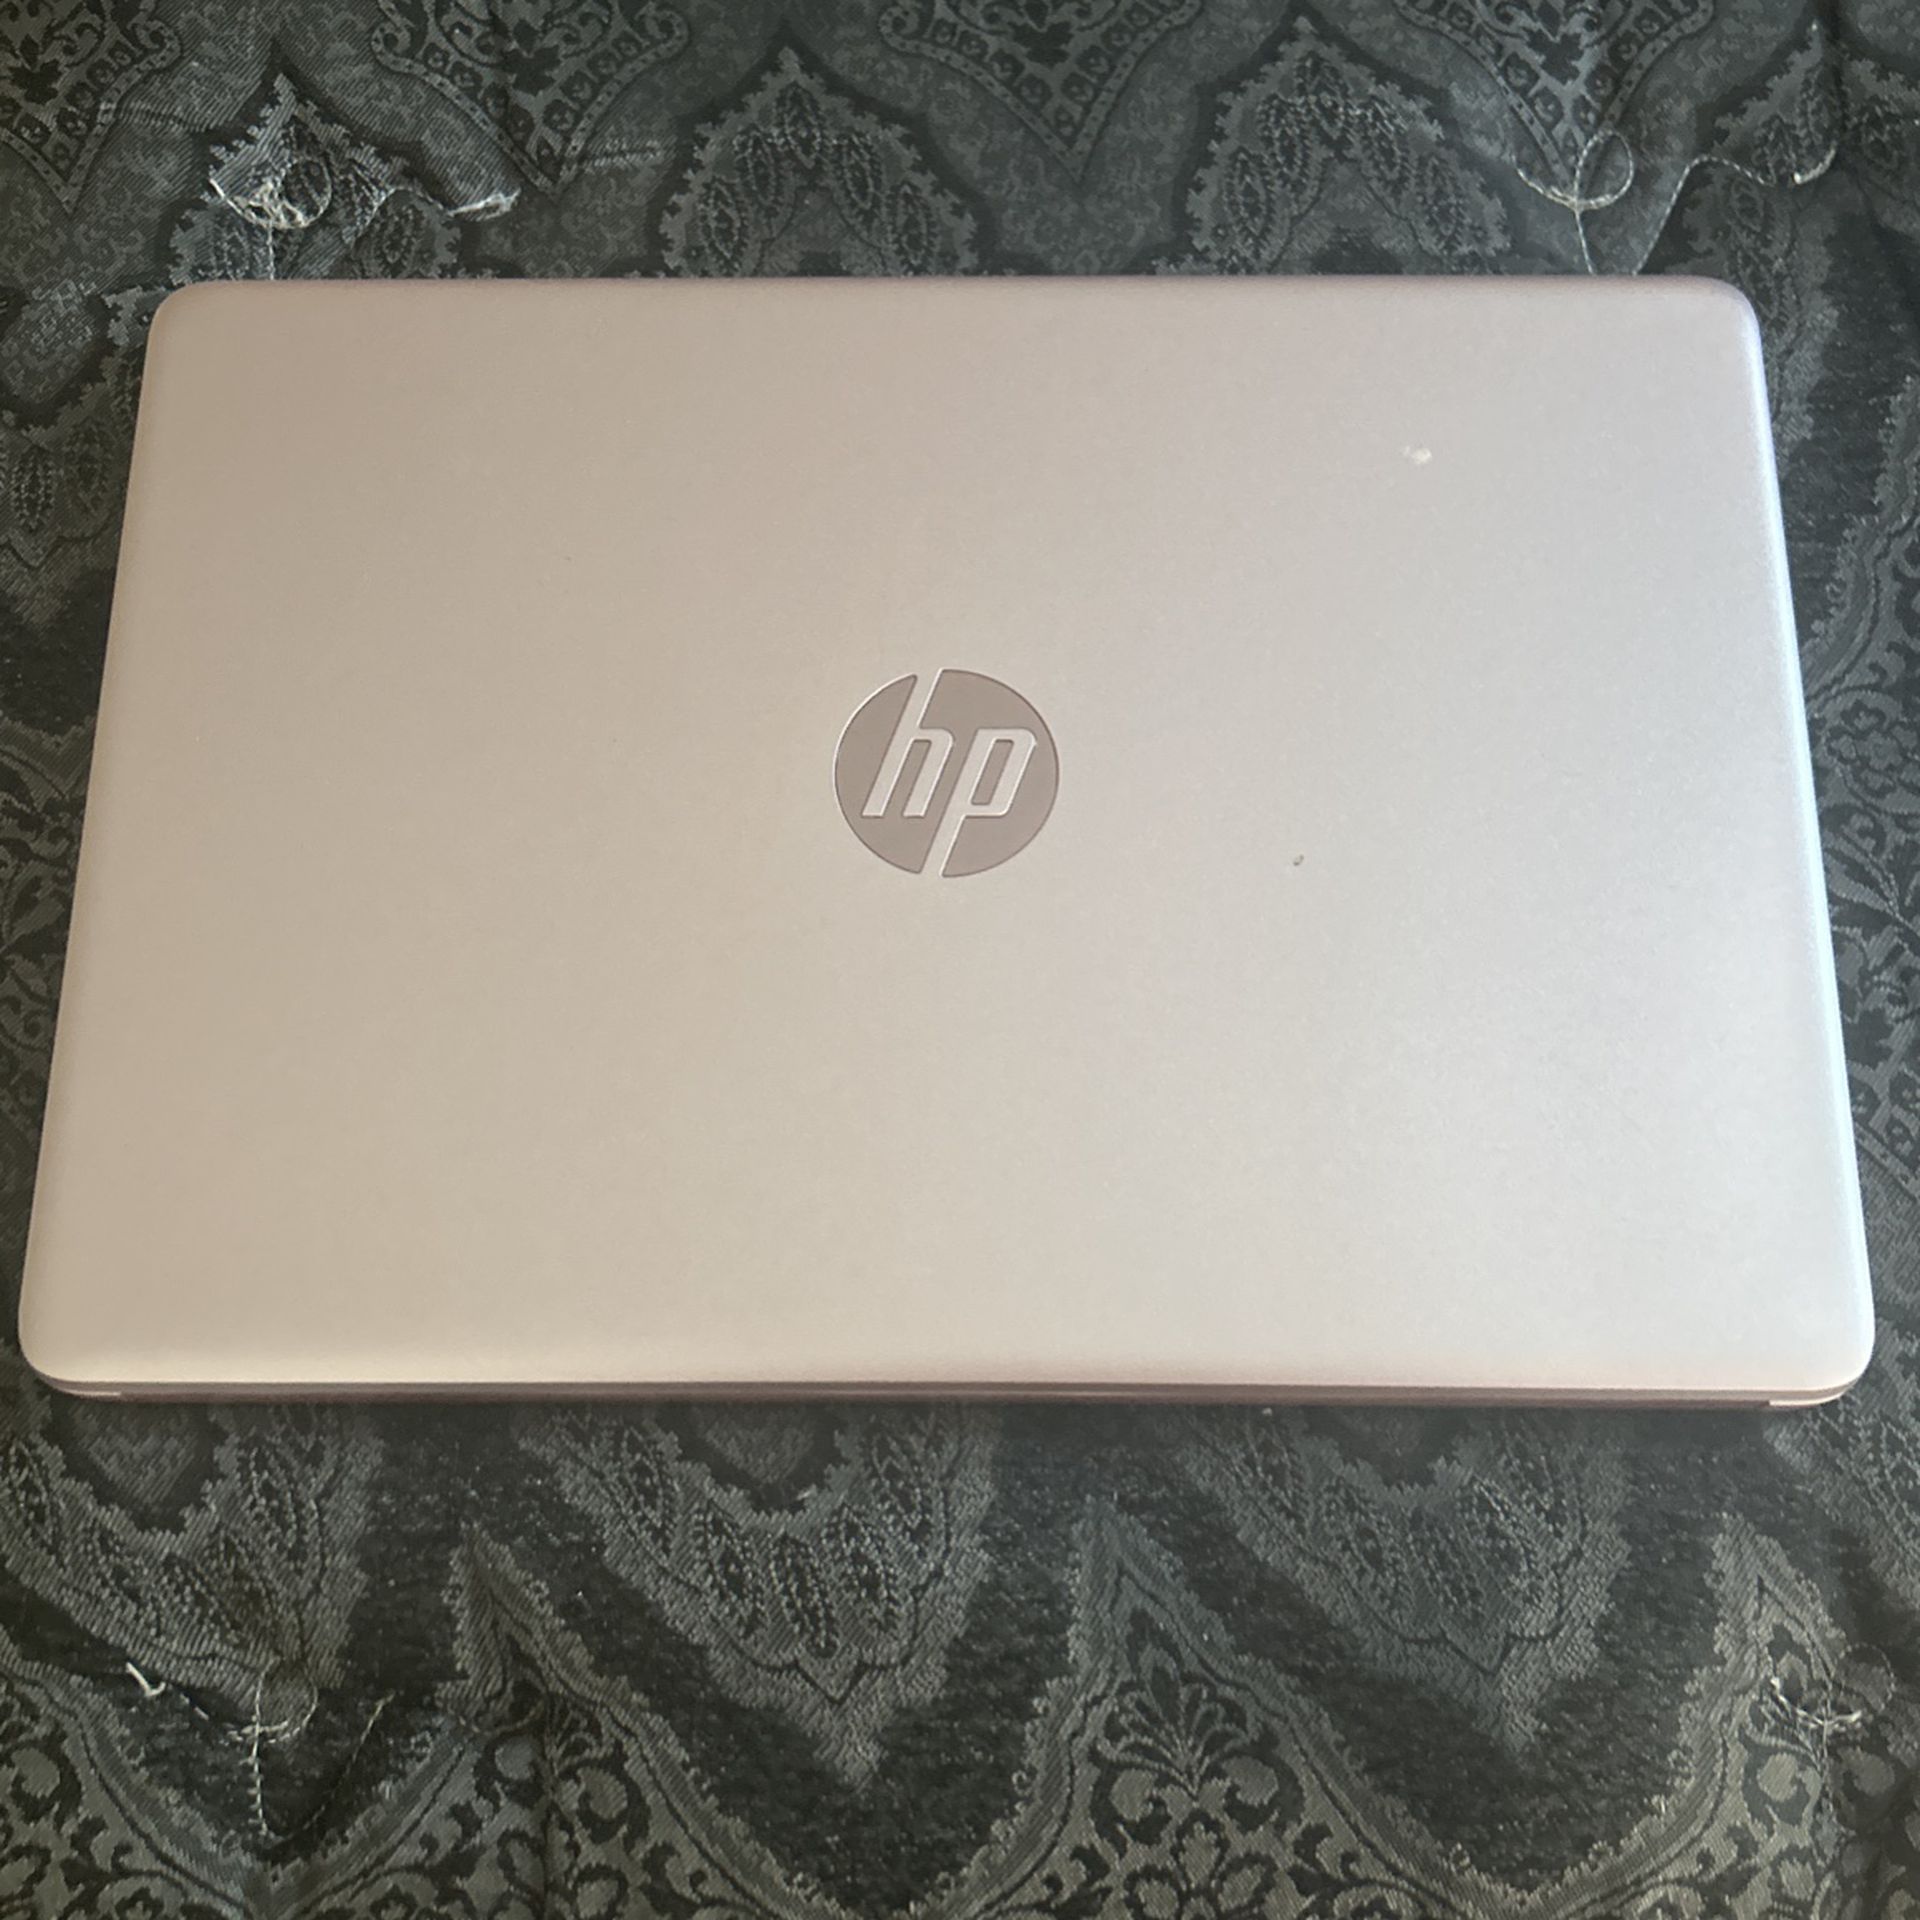 HP Laptop PINK! BEST OFFER No Lower Than $200